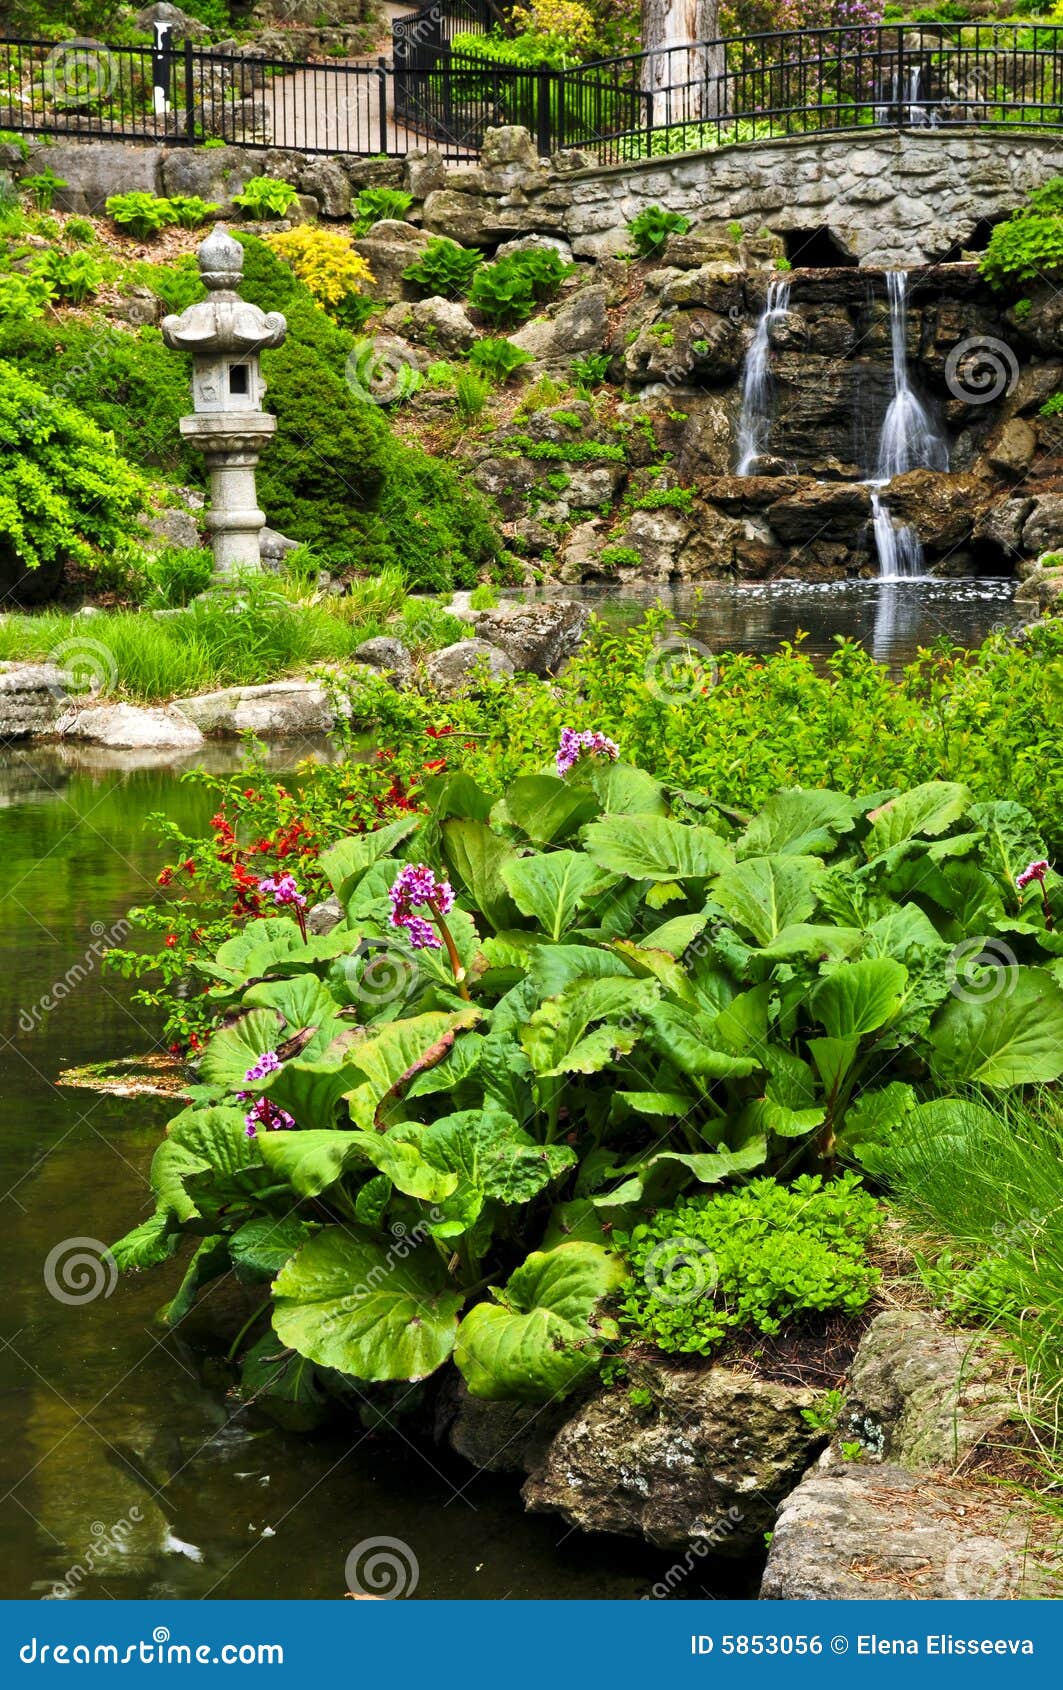 Cascading Waterfall And Pond Stock Photo Image Of Reflection